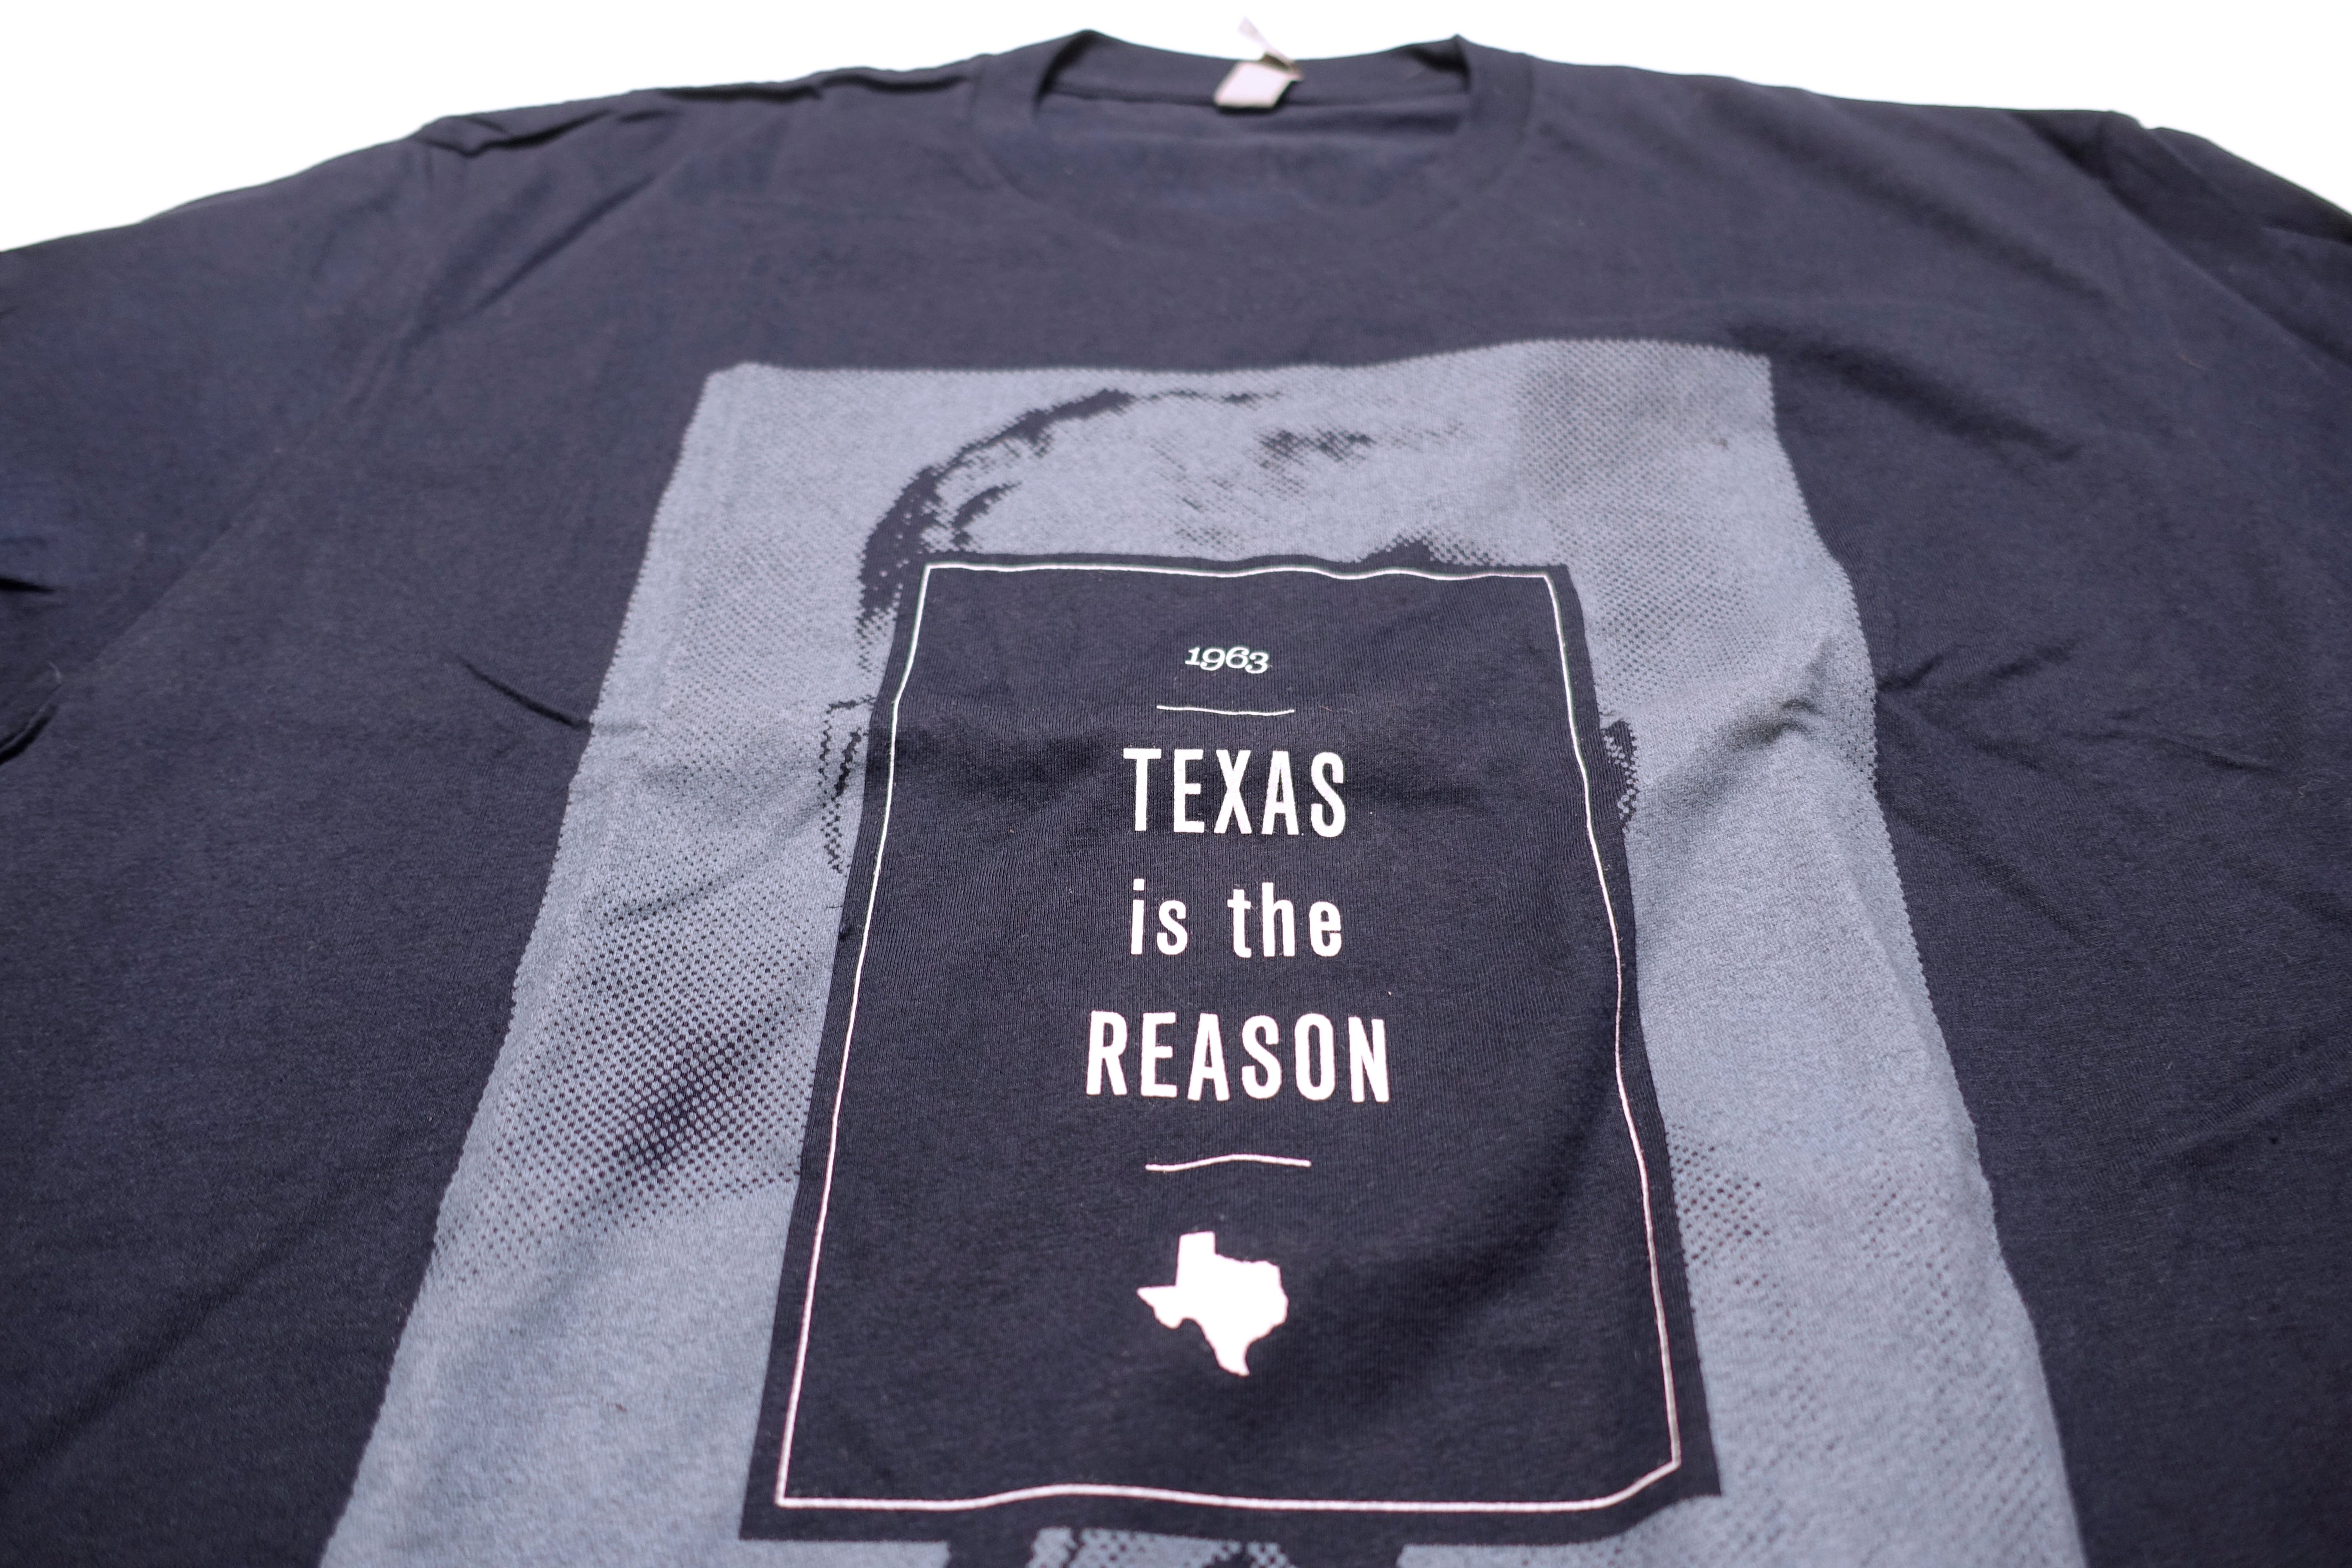 Texas Is The Reason - Kennedy Shirt Size Large